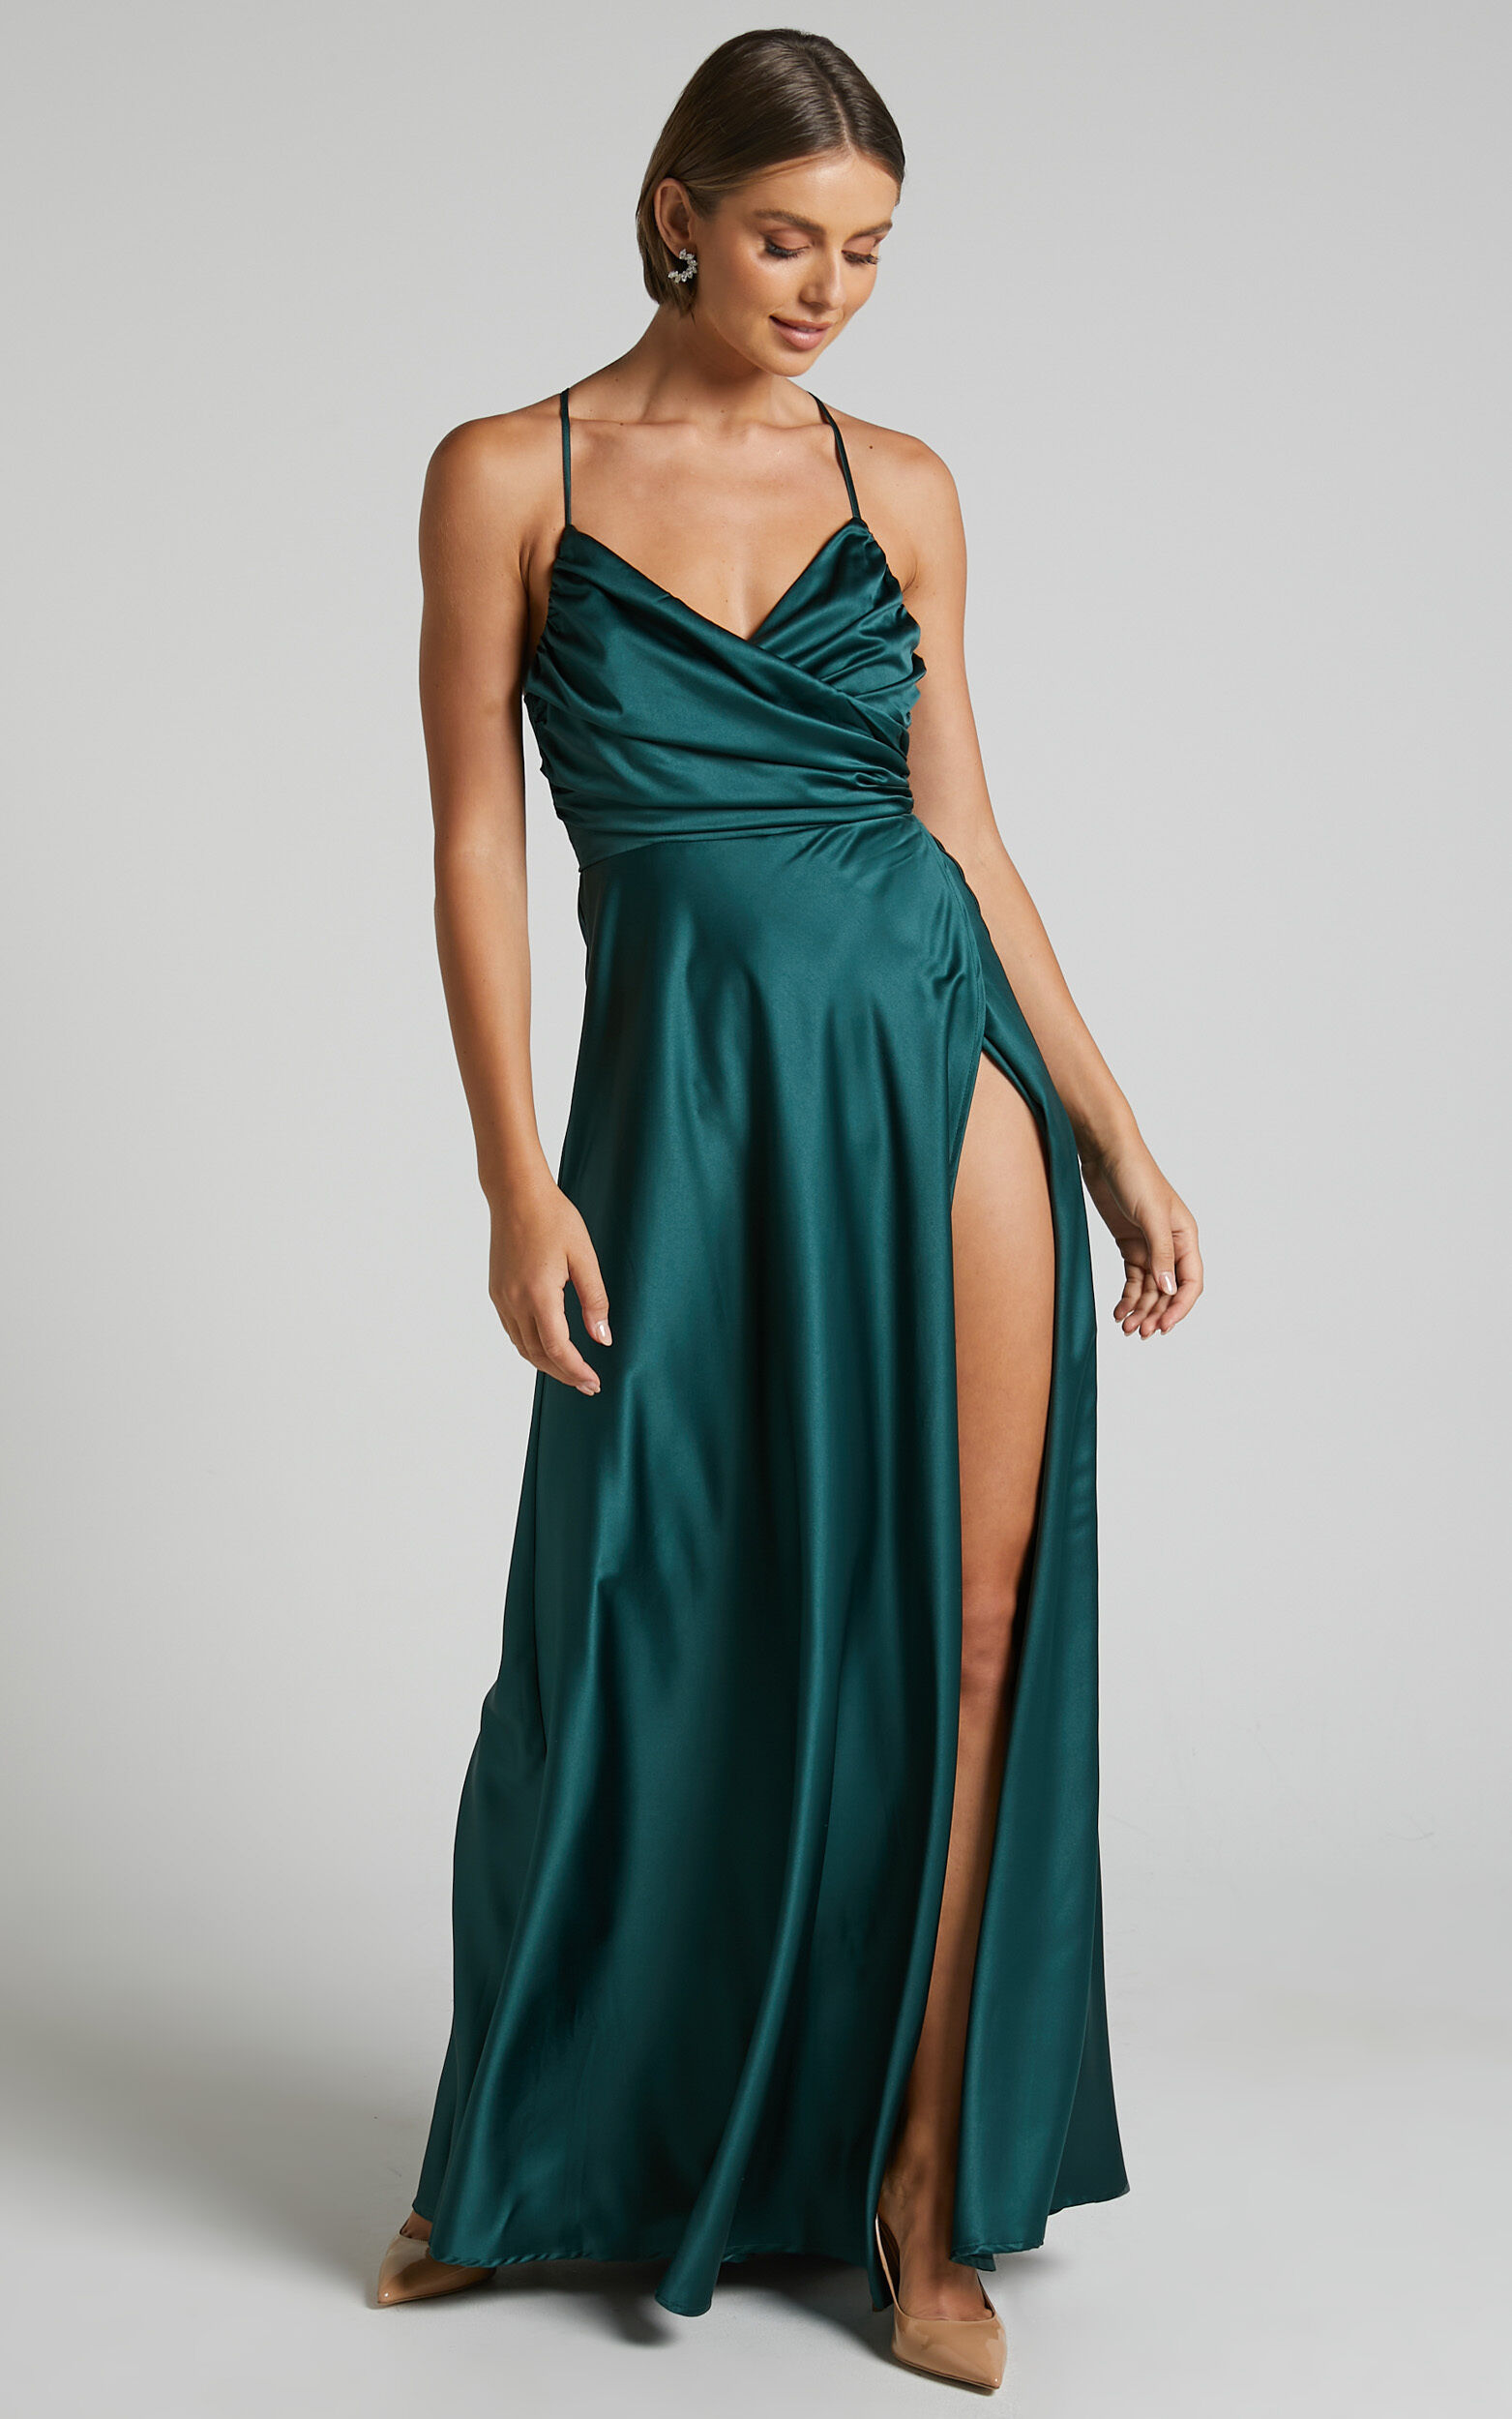 Chastine Maxi Dress - Ruched Bodice Front Satin Ball Gown in Emerald - 04, GRN1